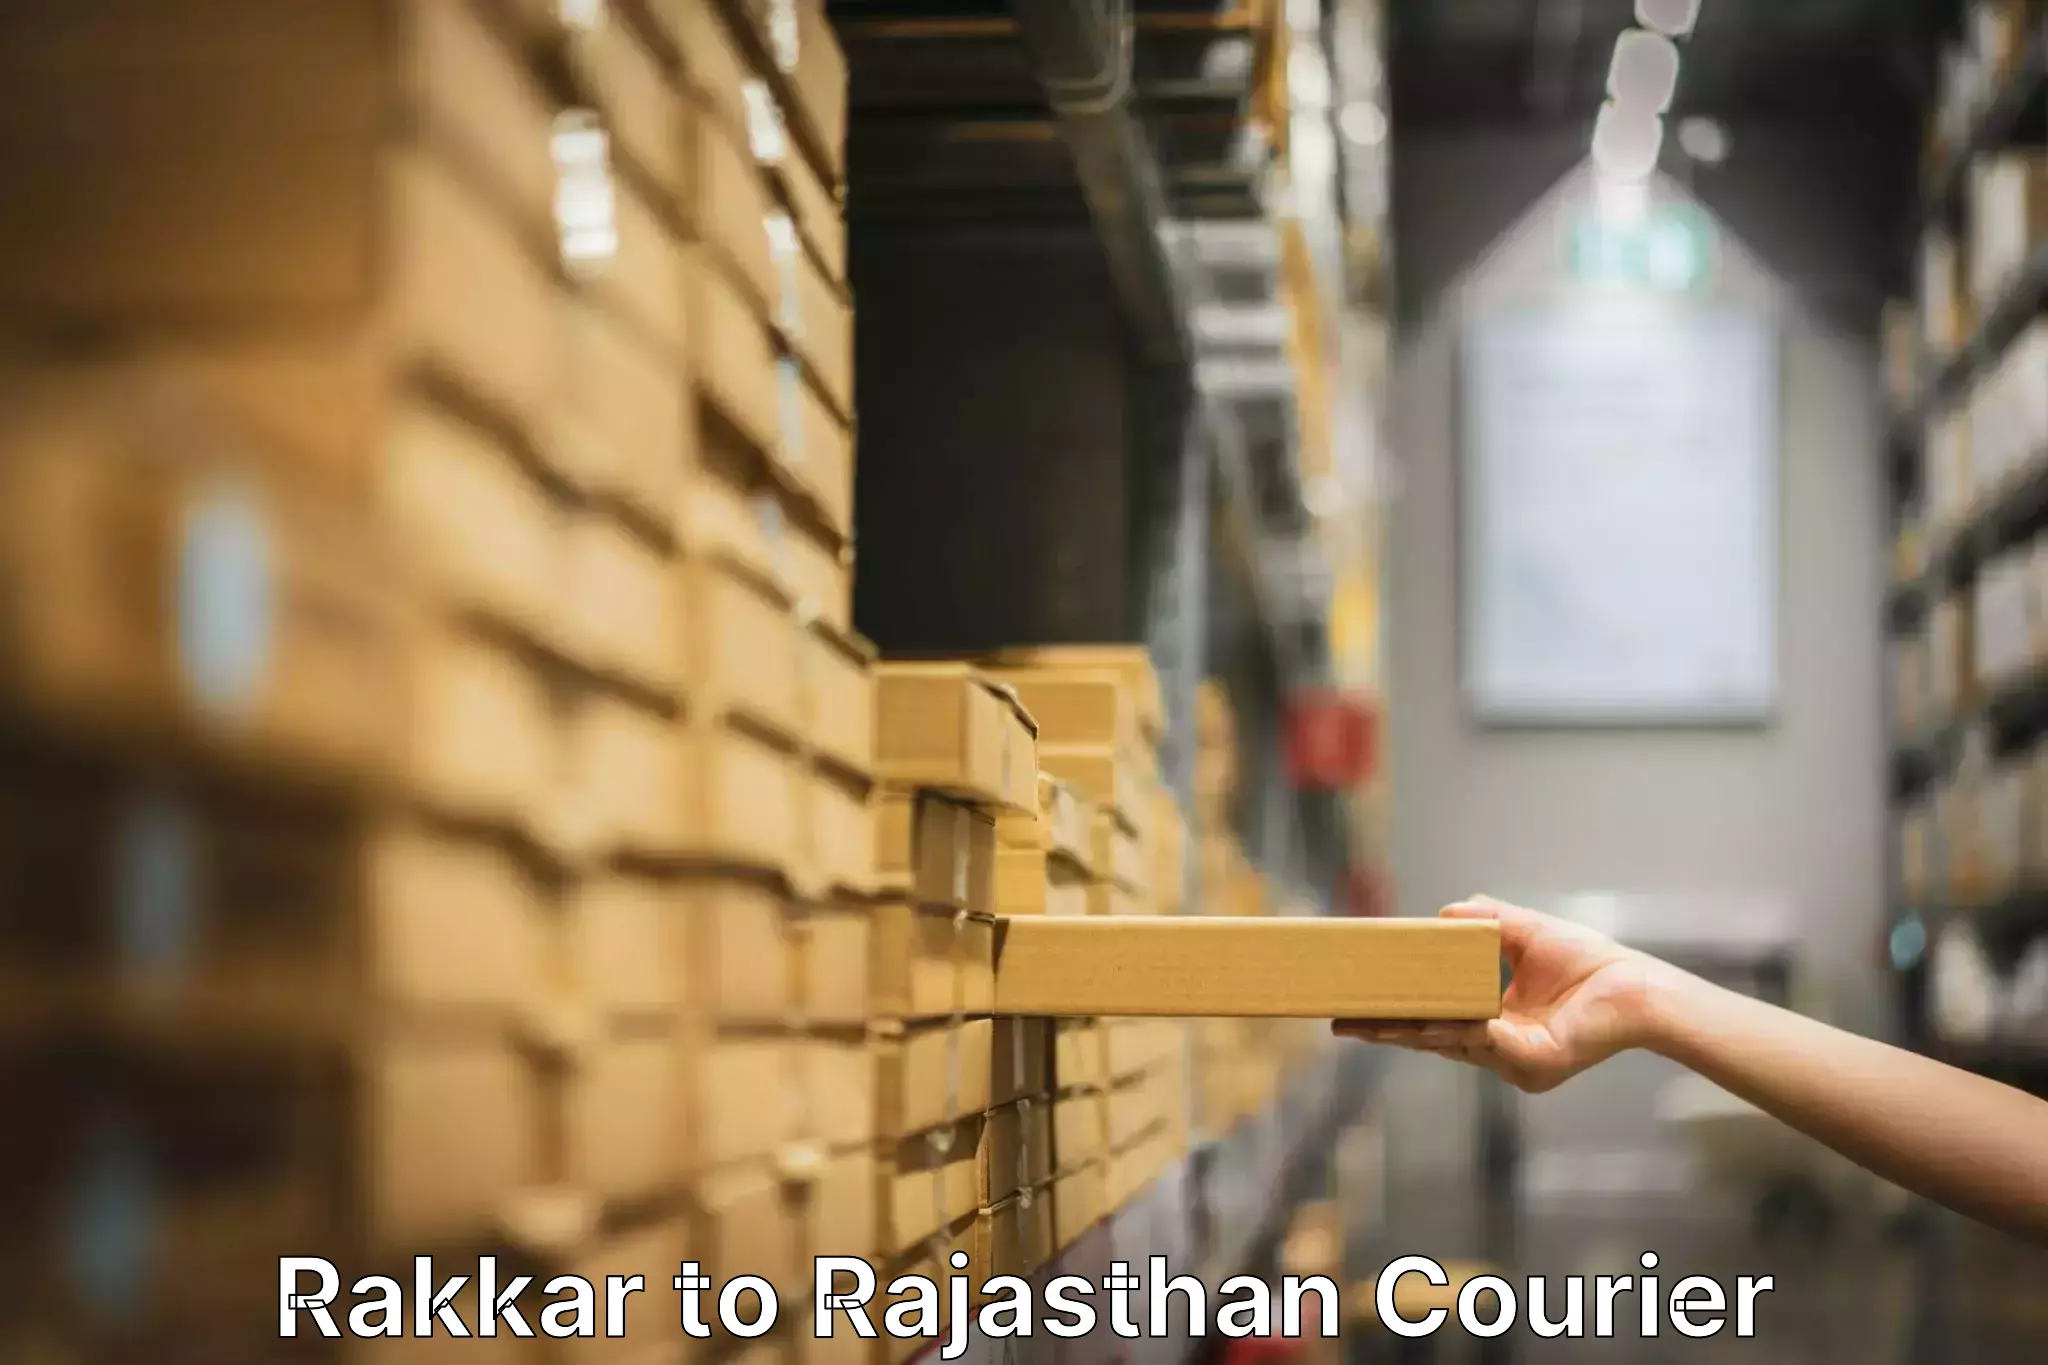 Professional packing services in Rakkar to Mathania